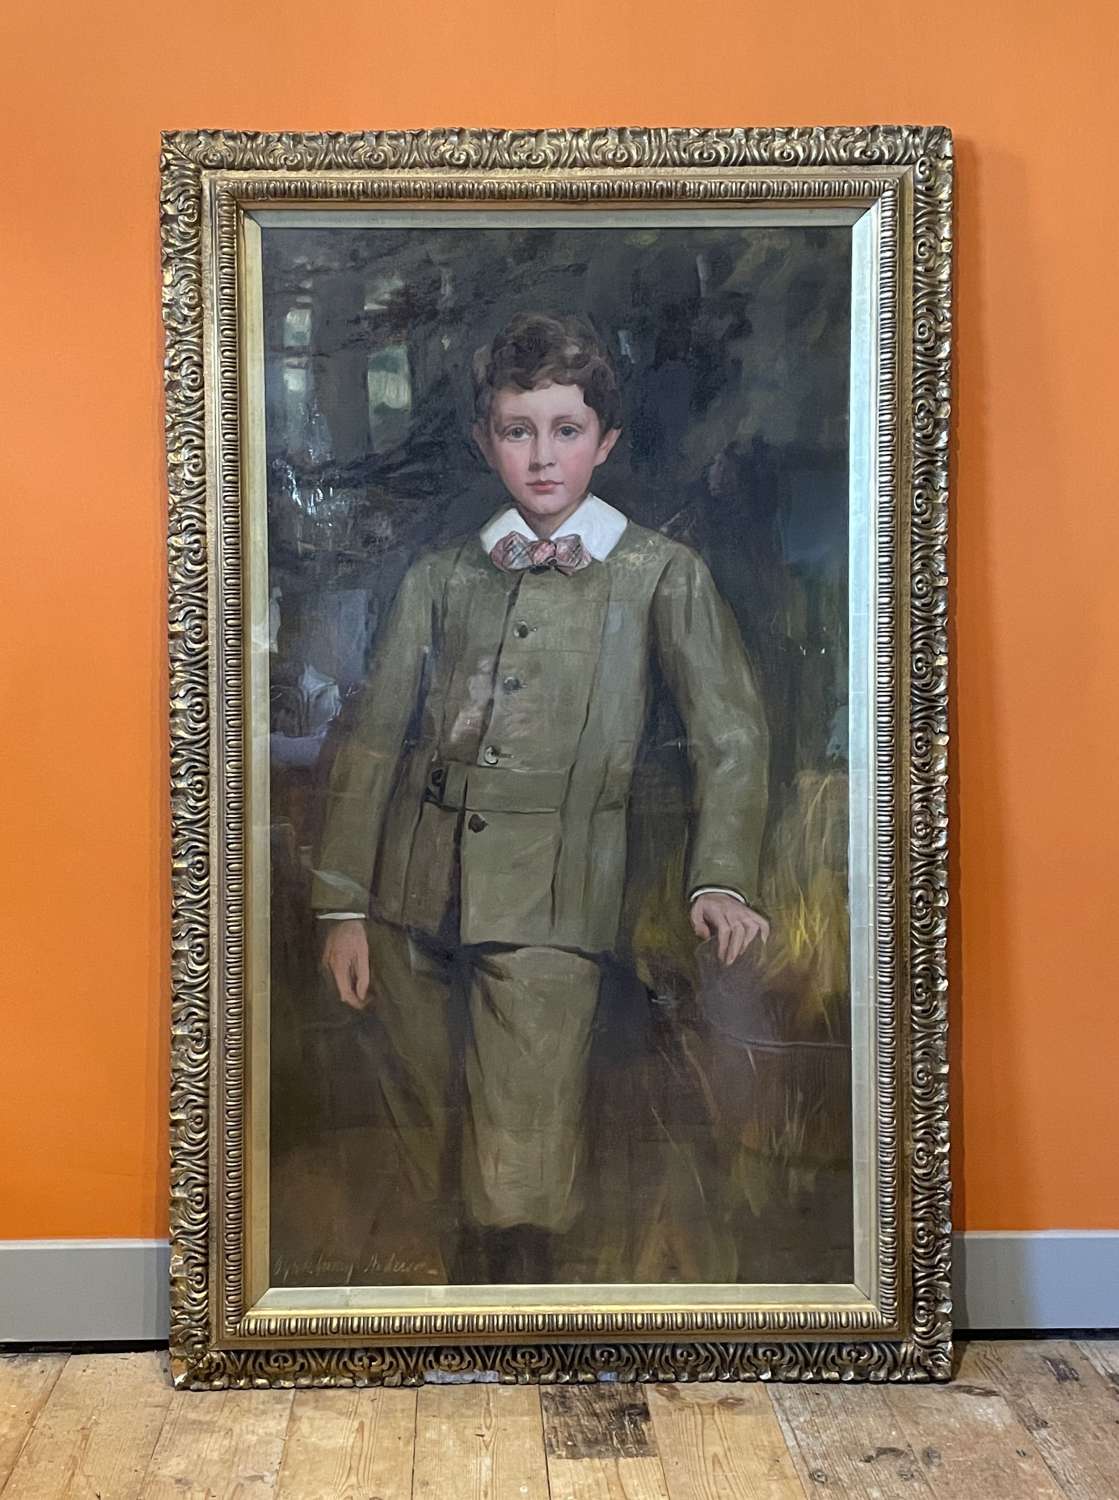 Charles Goldsborough Anderson, Portrait of a Young Boy, Oil on Canvas